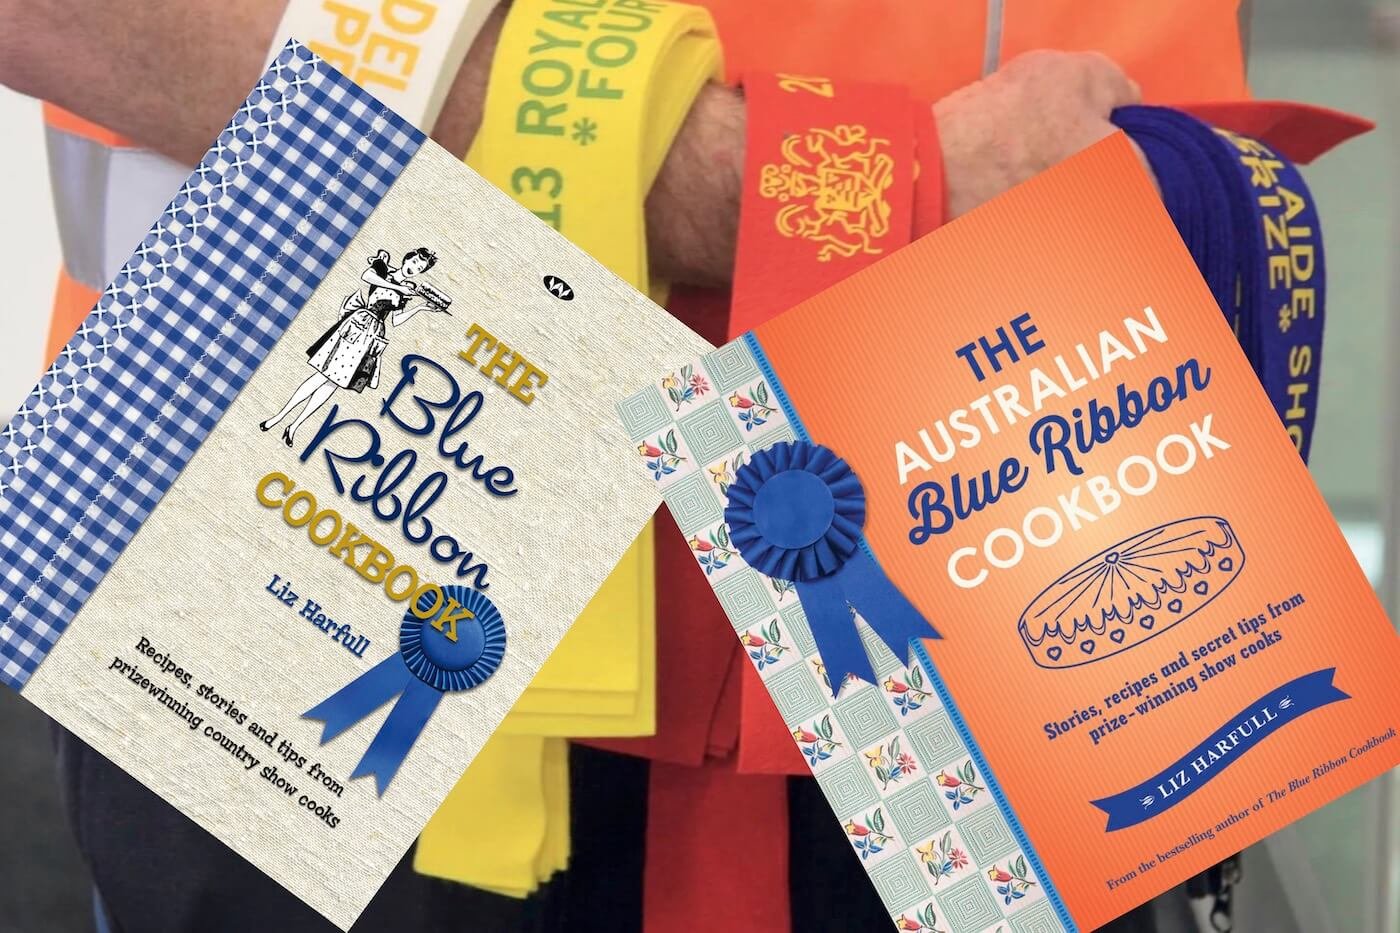 Behind the Cookbook: The Blue Ribbon Cookbook